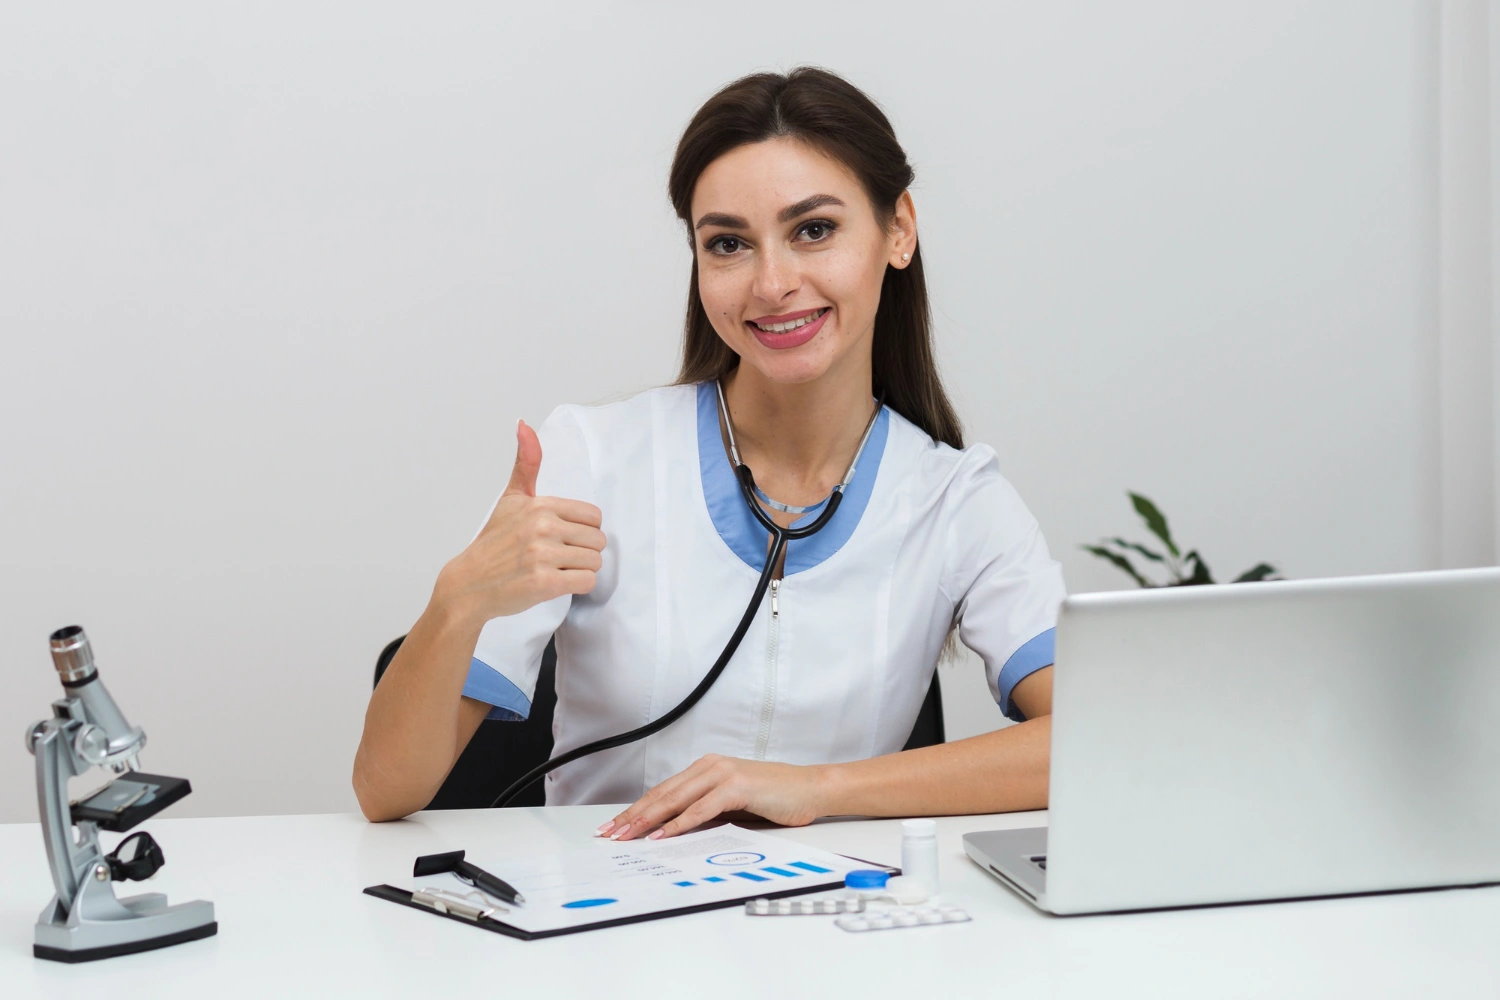 Tips to Get a Healthcare Job in Australia